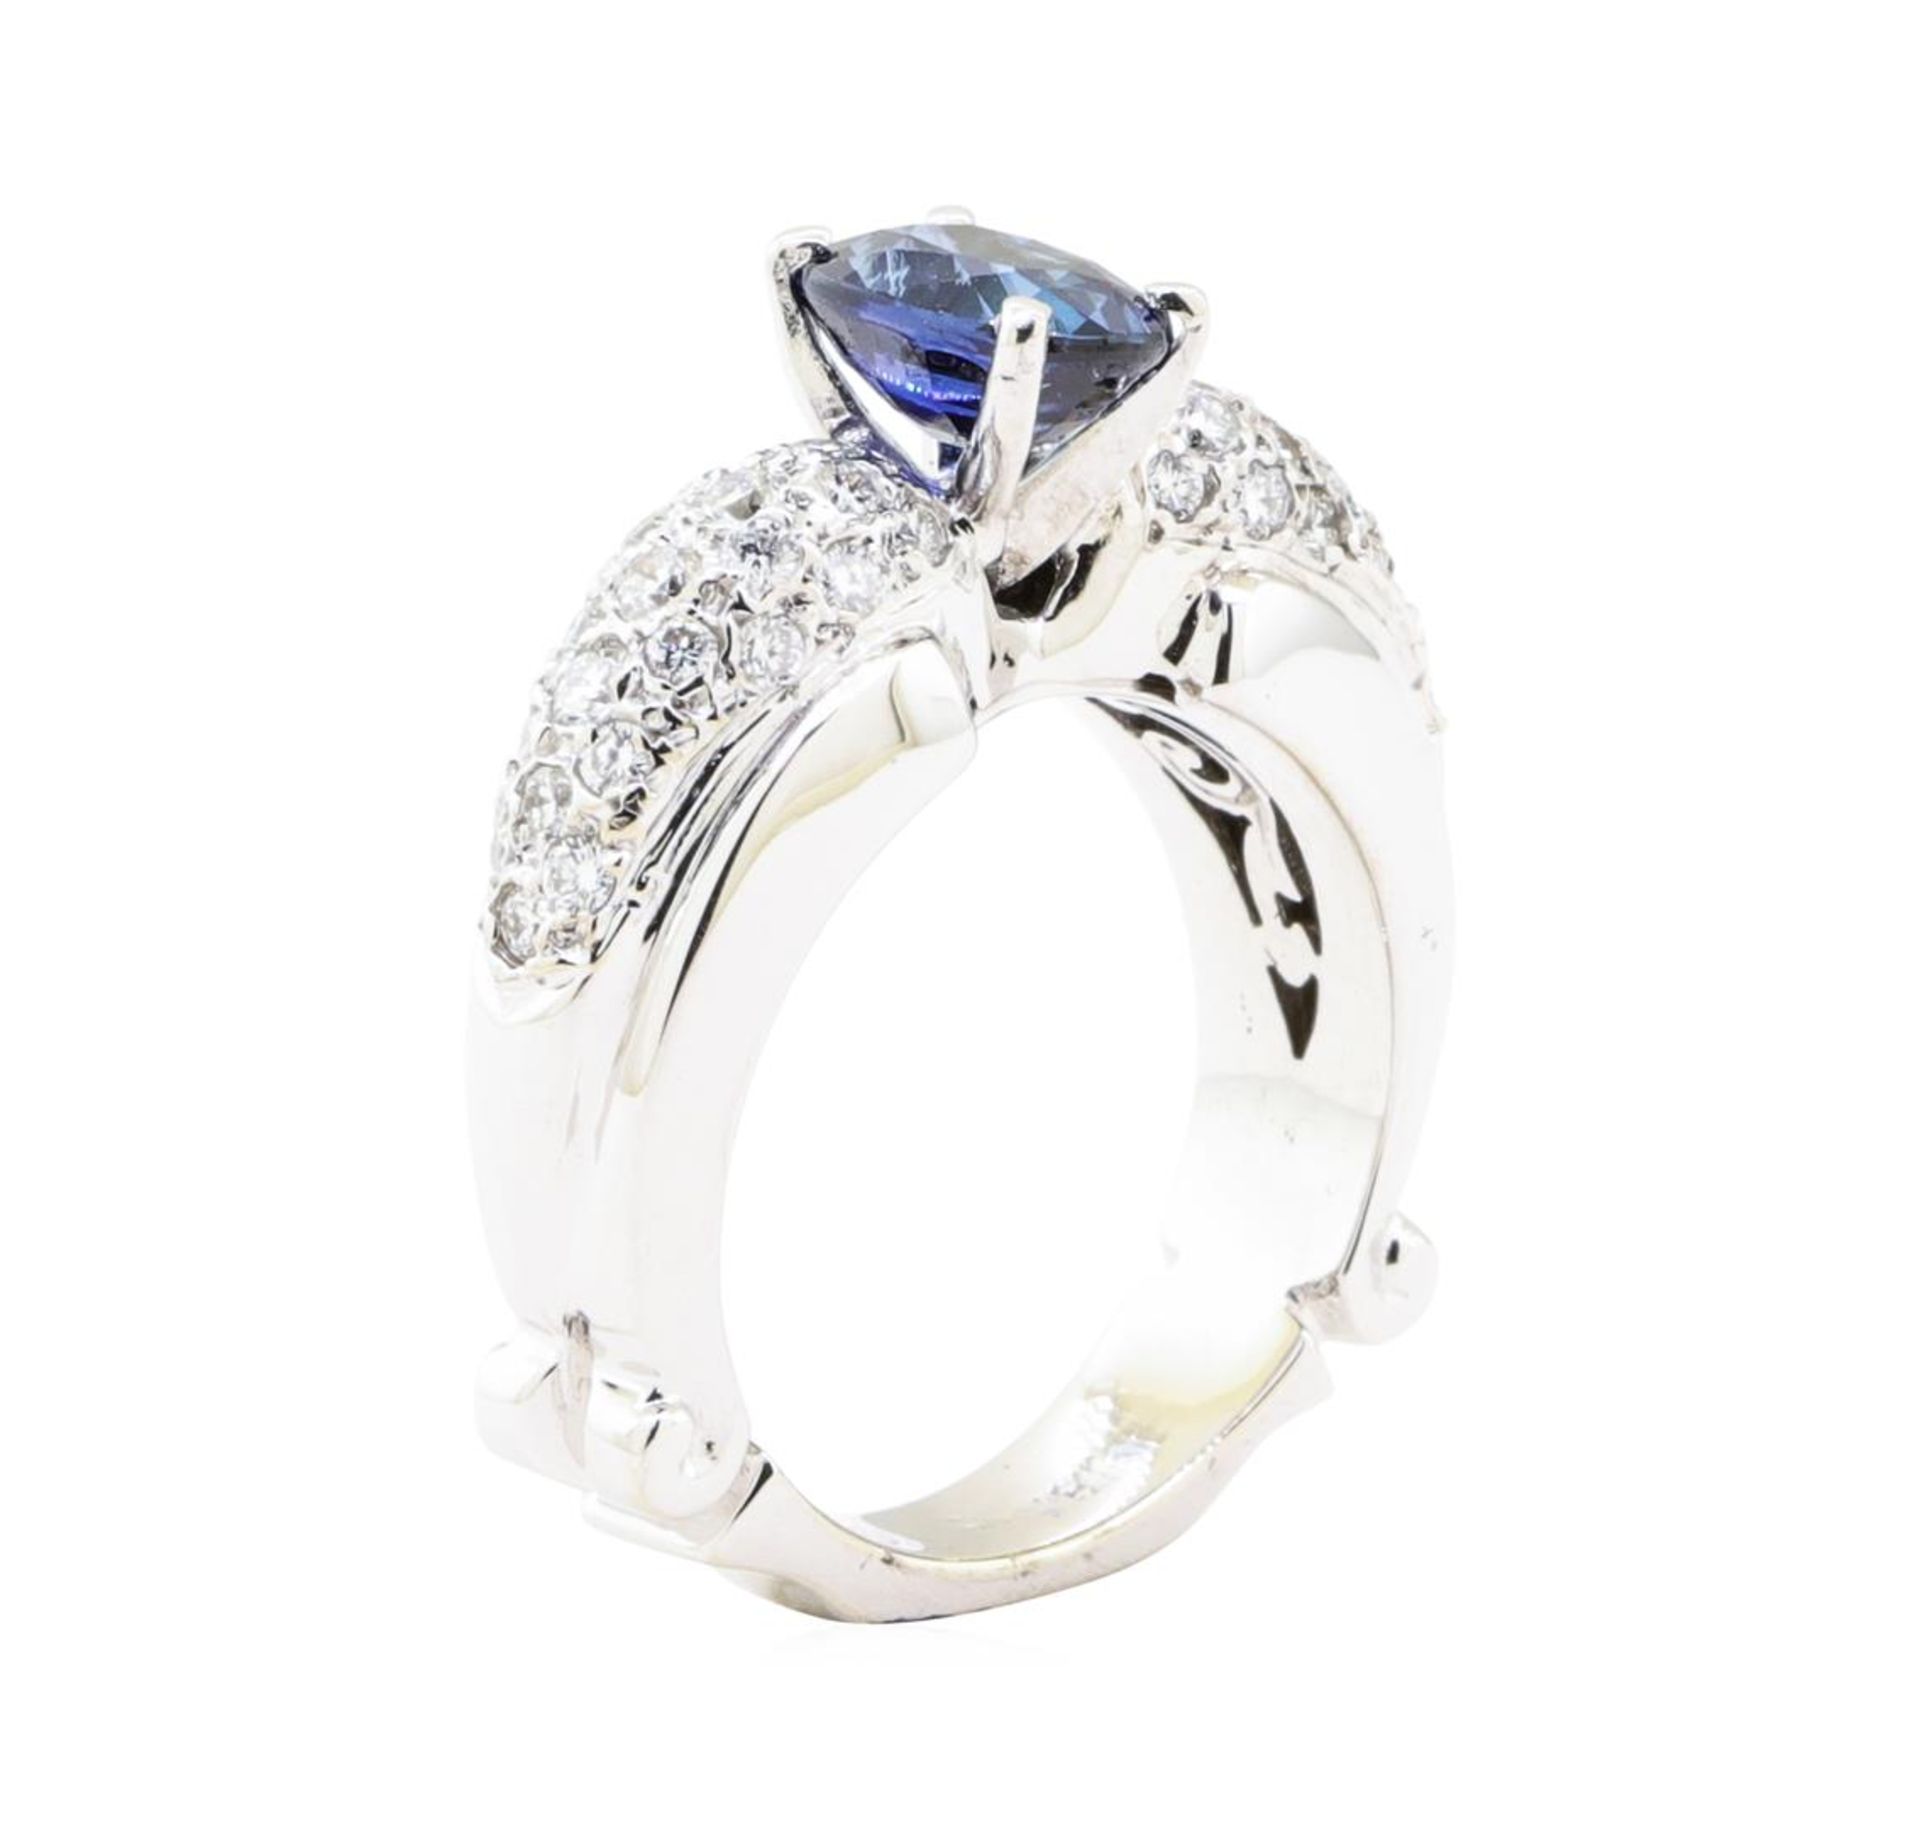 2.81 ctw Sapphire And Diamond Ring - 18KT White Gold - Image 4 of 5